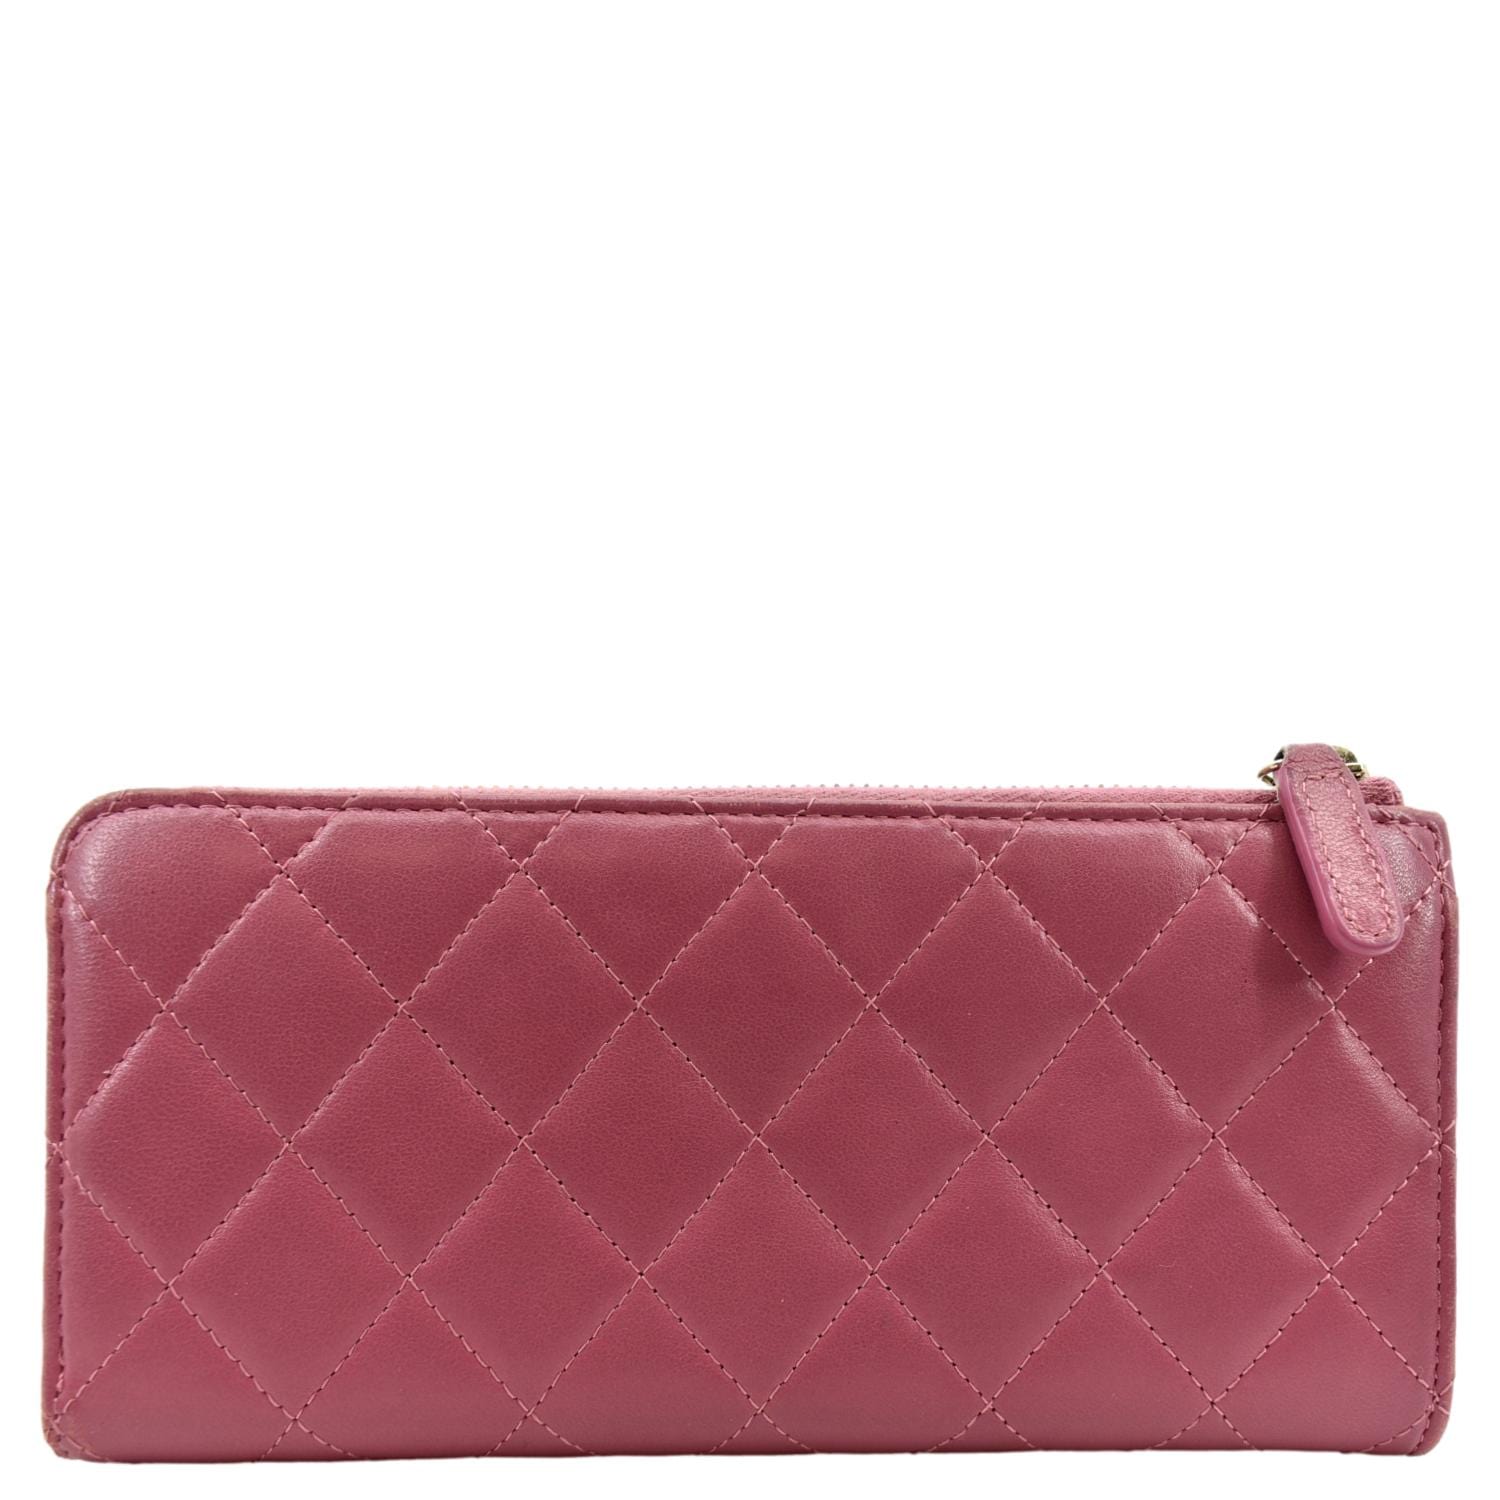 chanel red wallet leather